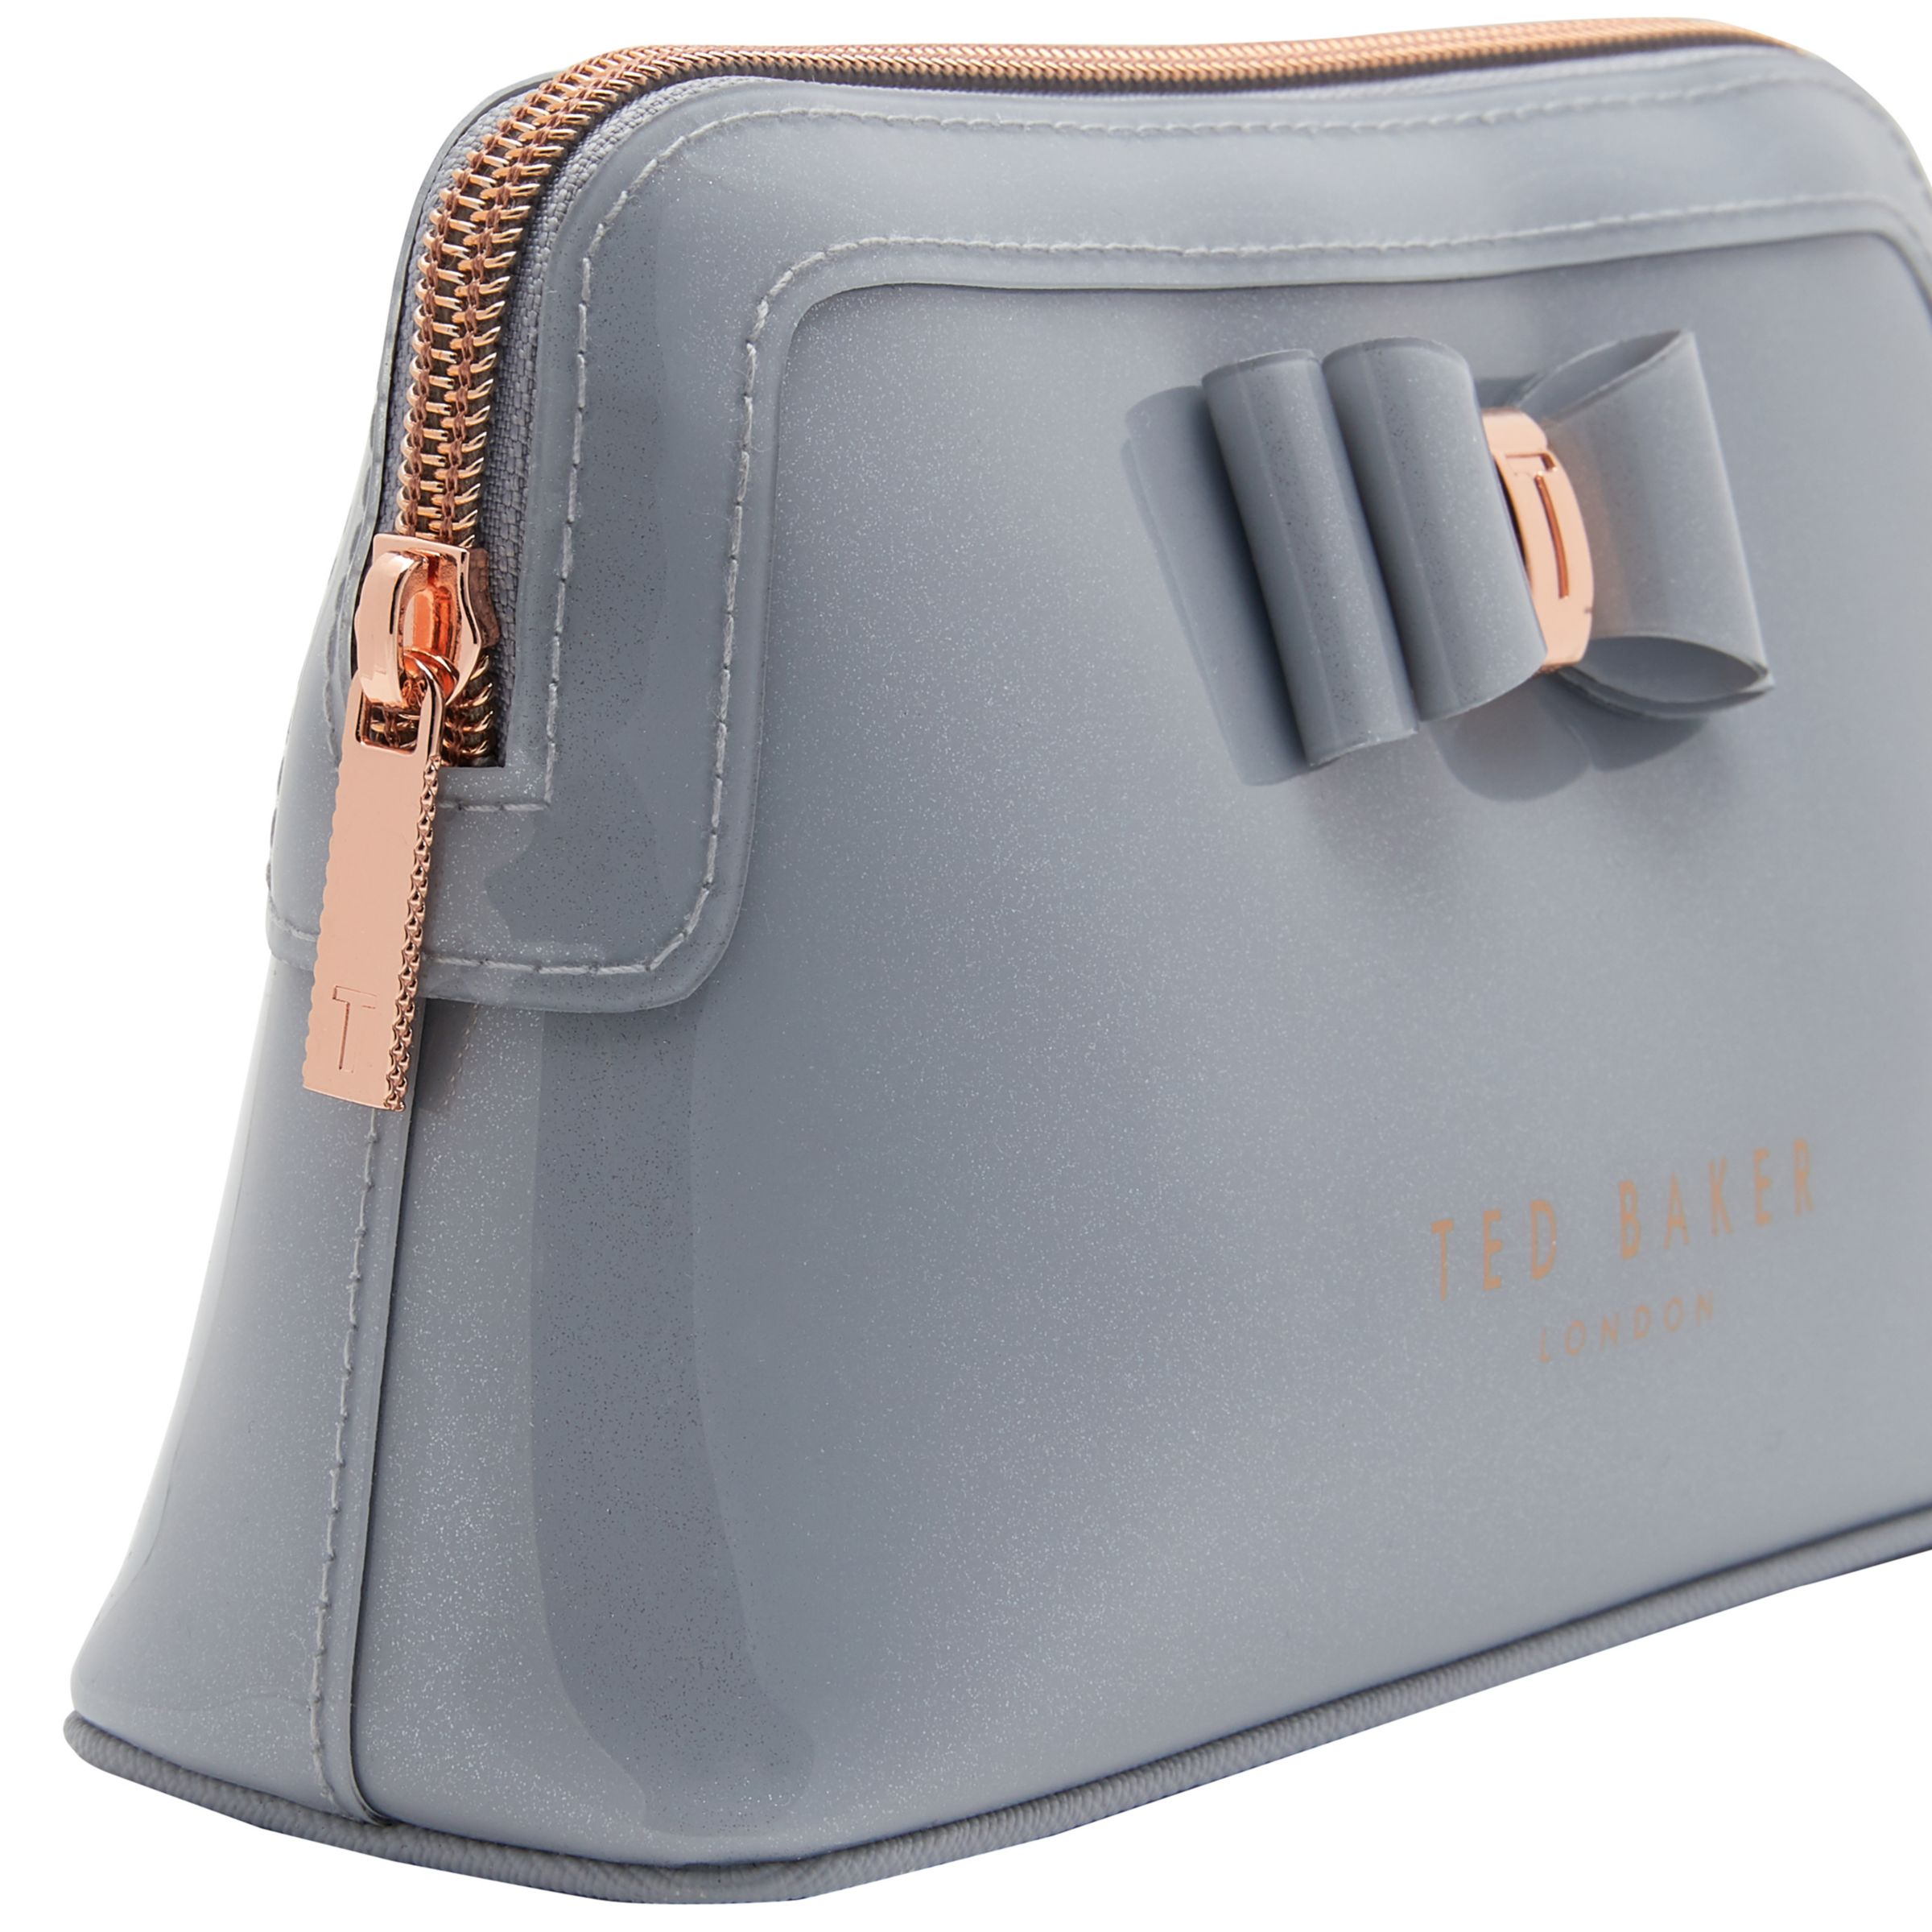 Ted Baker Handbags Prices In South Africa | semashow.com